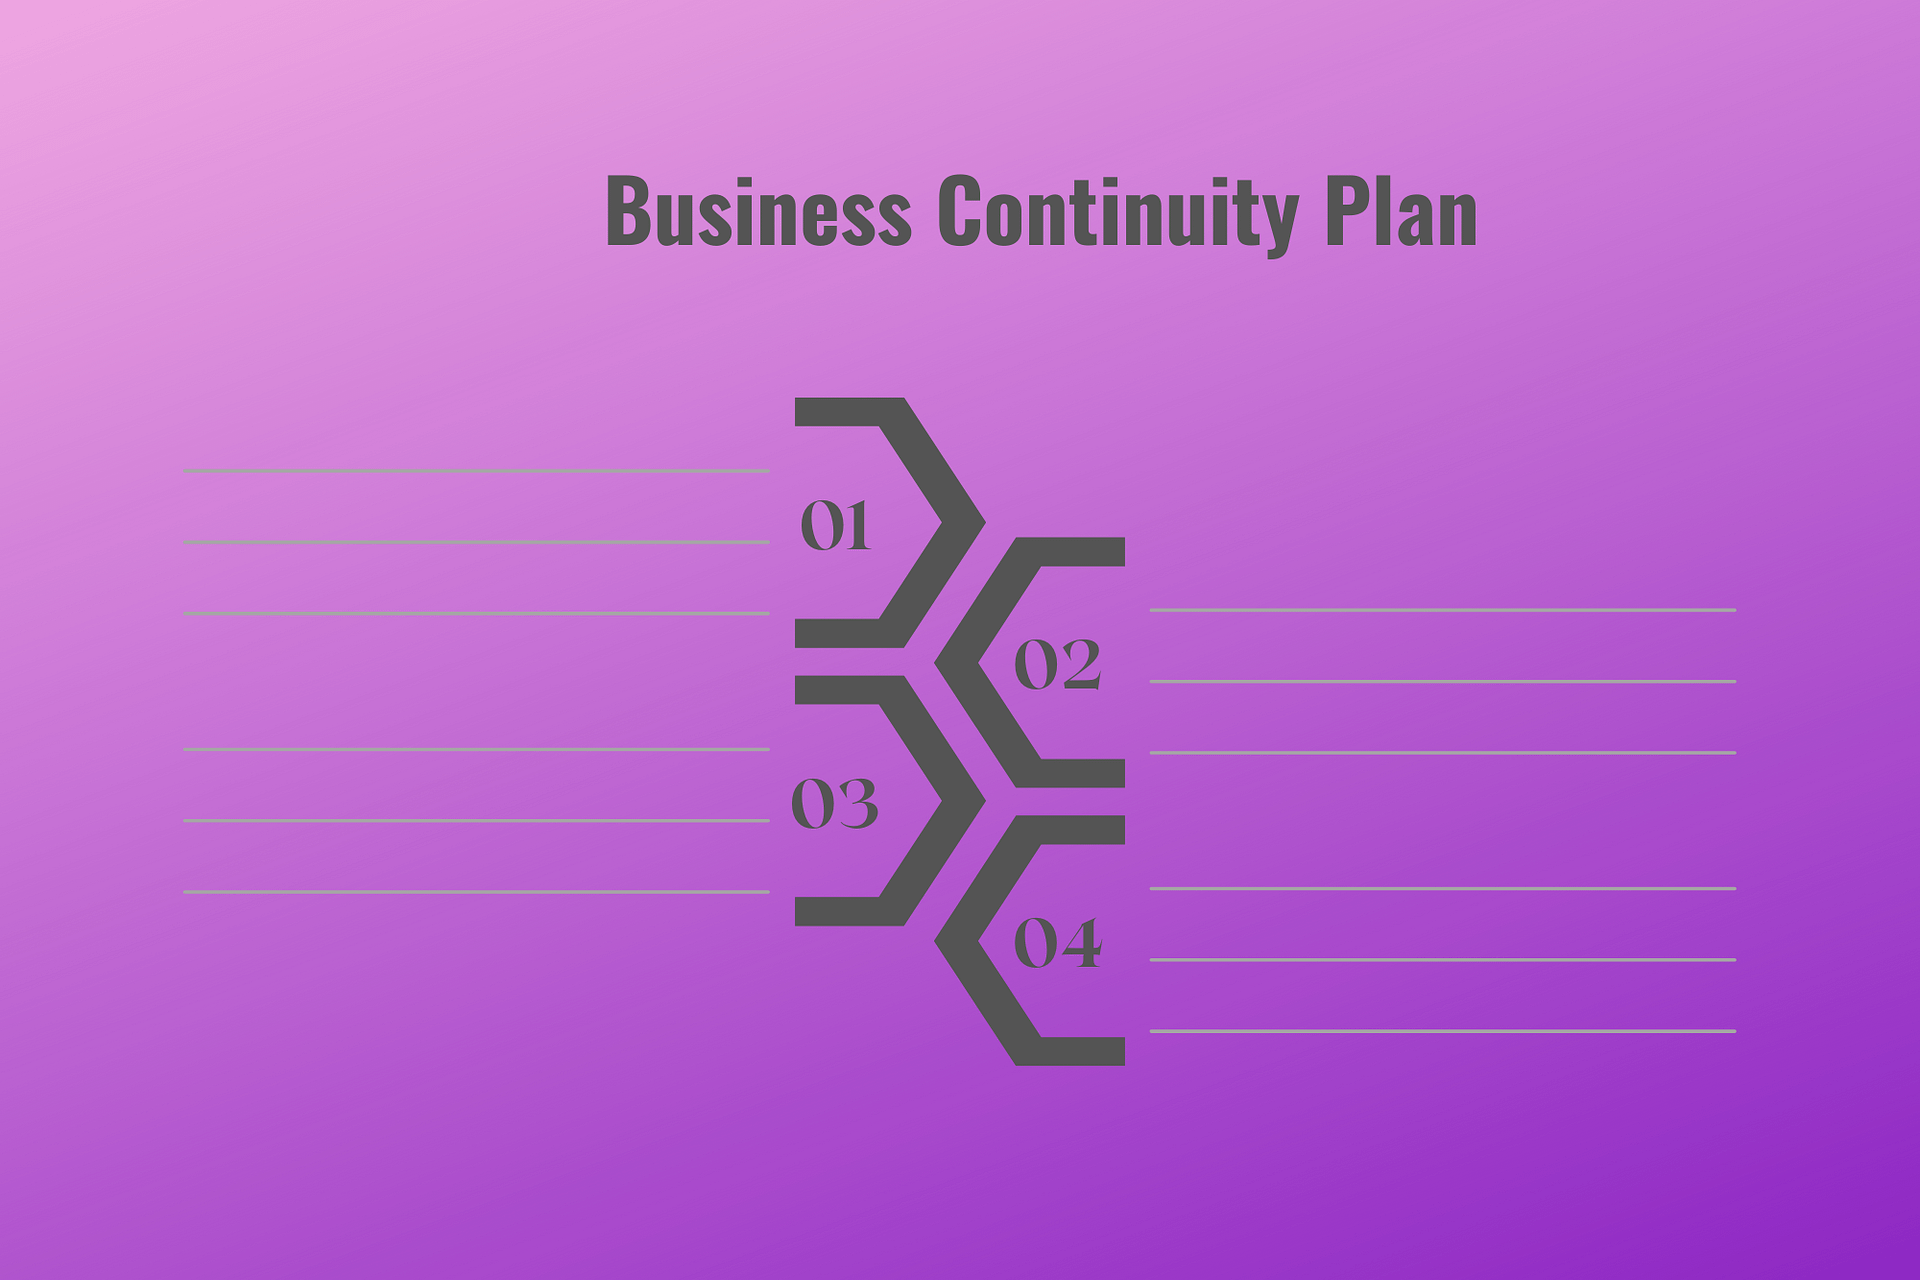 Does Your Cannabis Retail Store Have a Business Continuity Plan (BCP)?